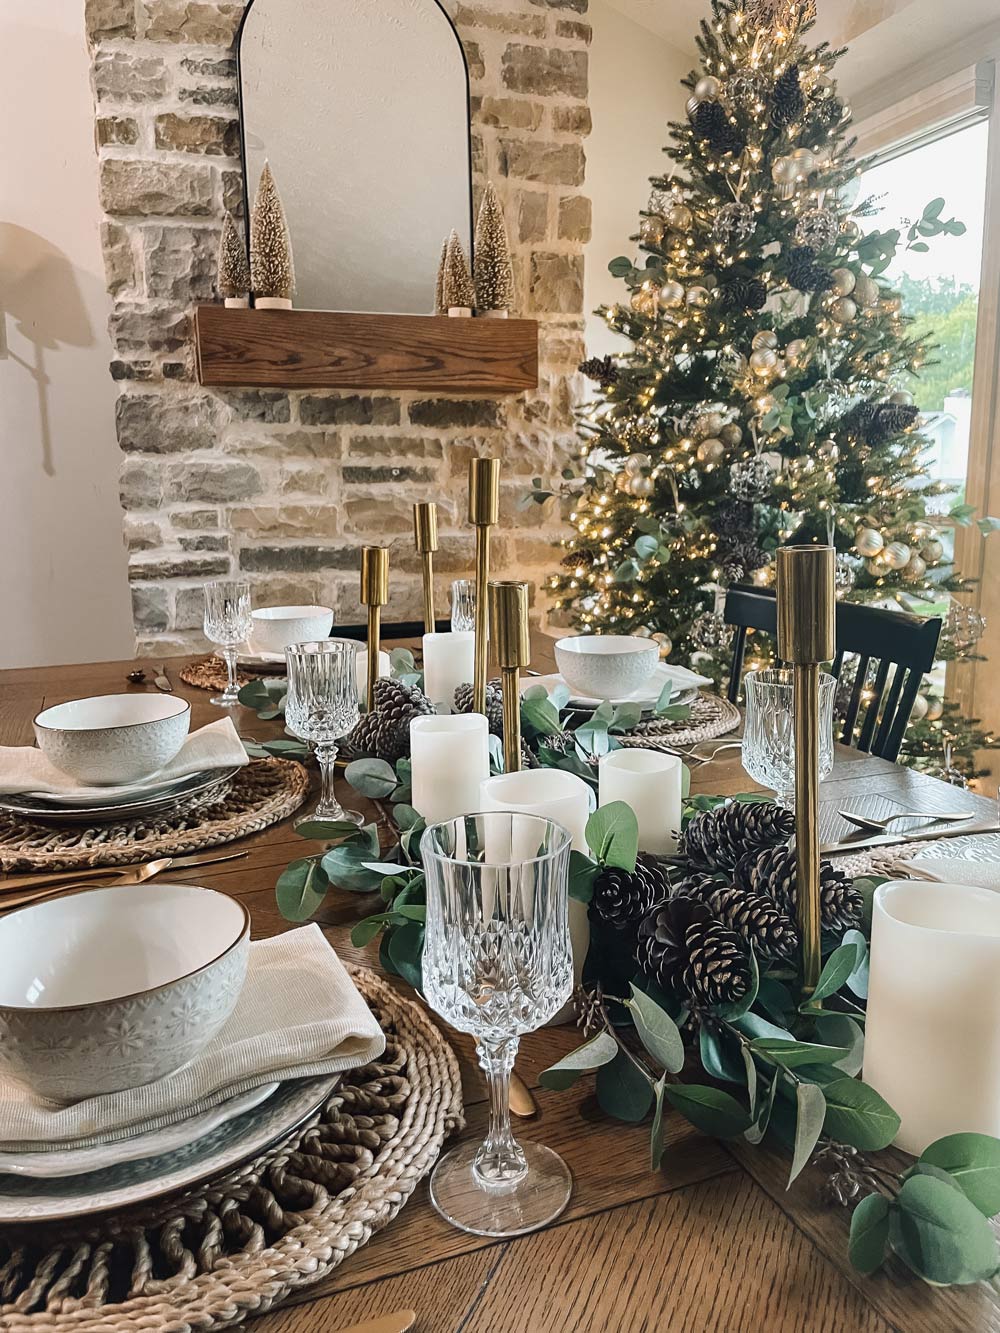 Dining room with dinnerware and Christmas tree in the background.